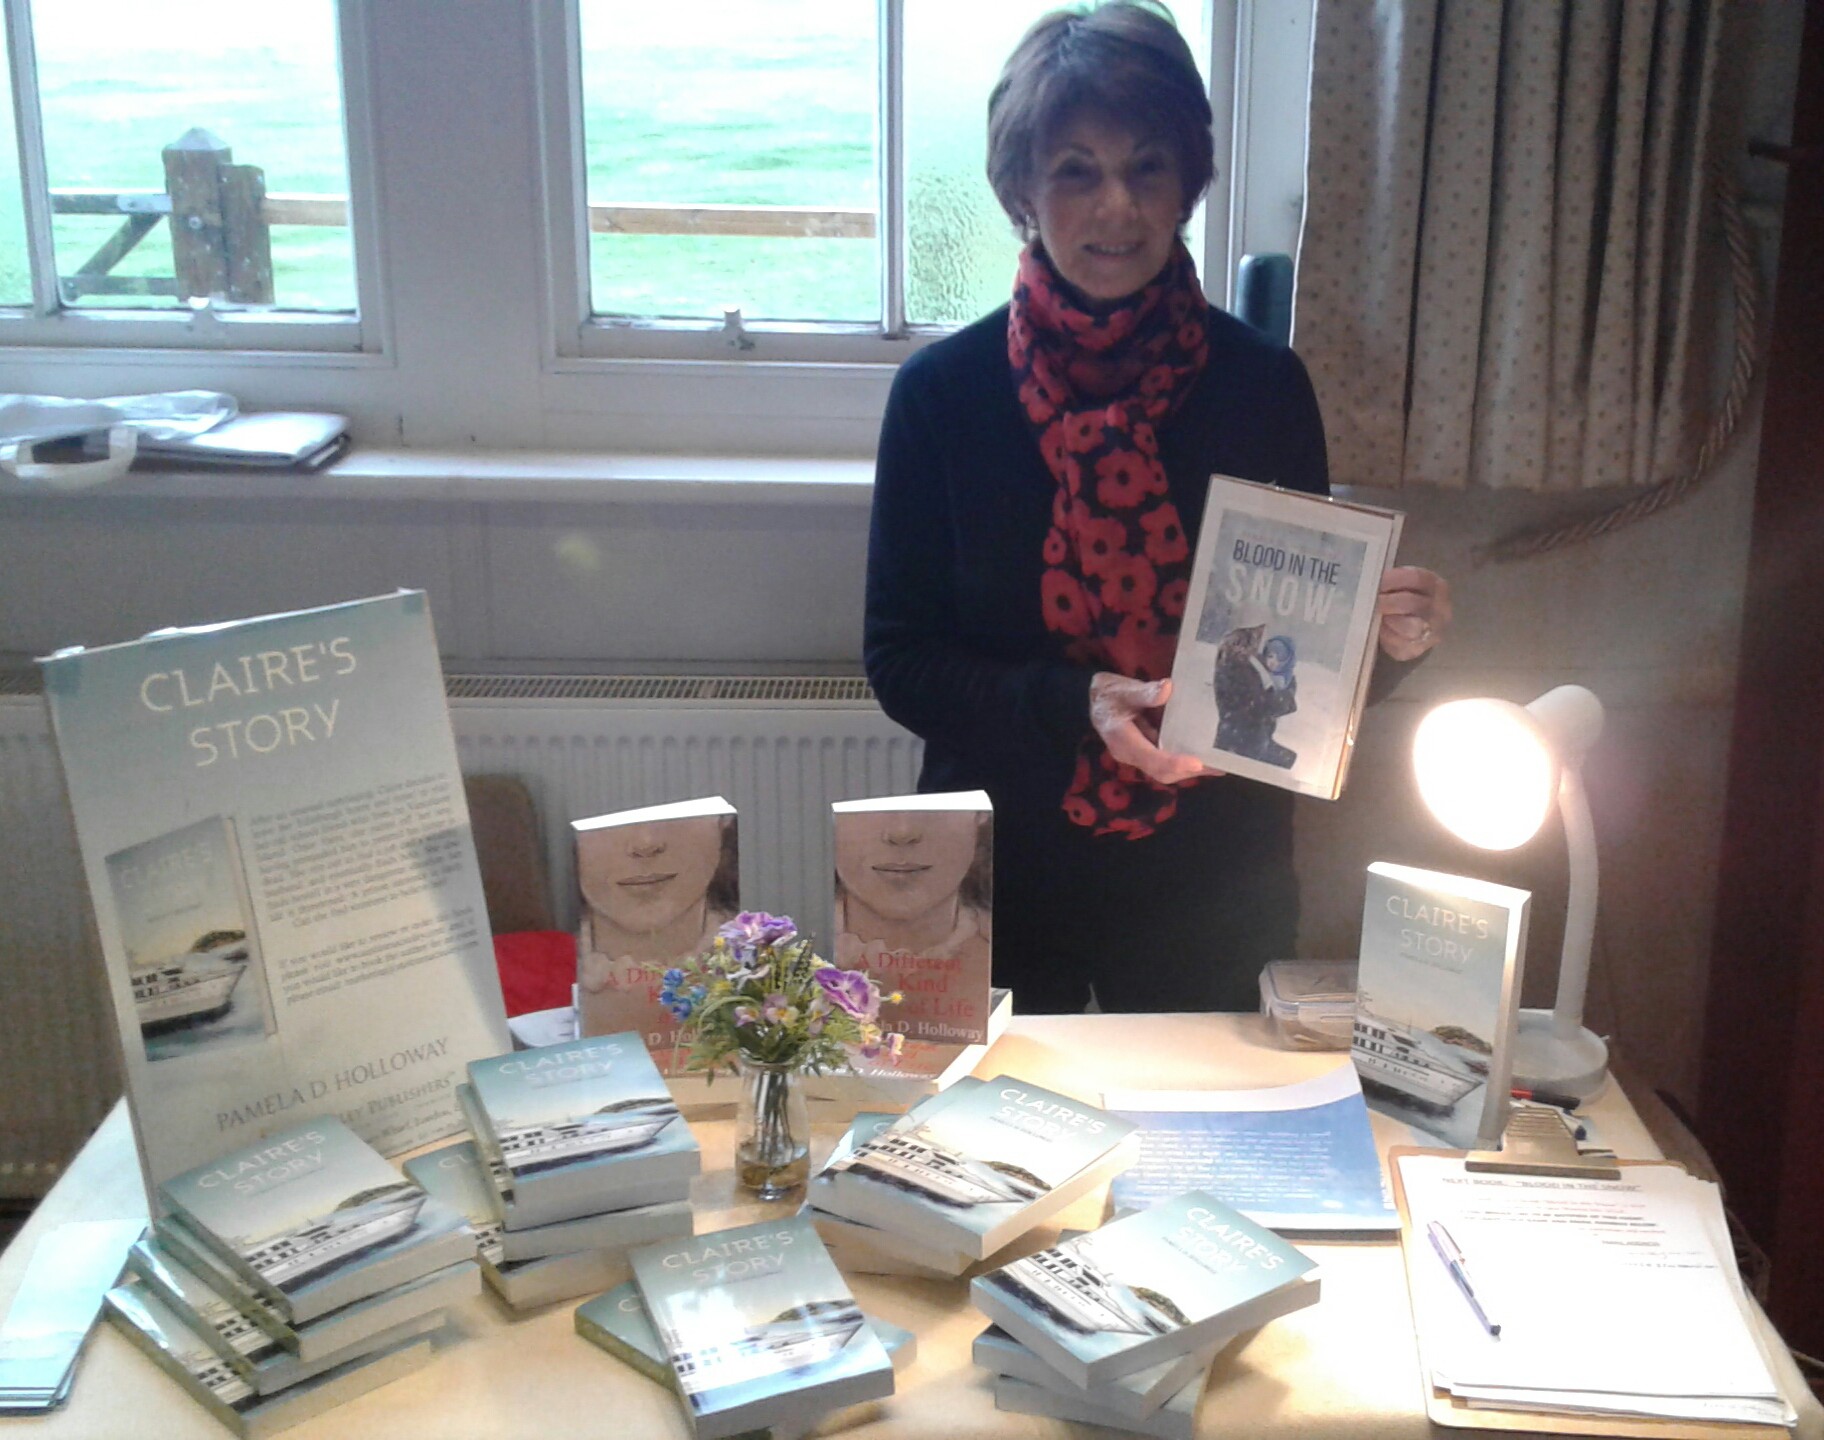 Book signing of ‘Claire’s Story’ by Pamela D. Holloway held at Winchelsea Christmas Fair